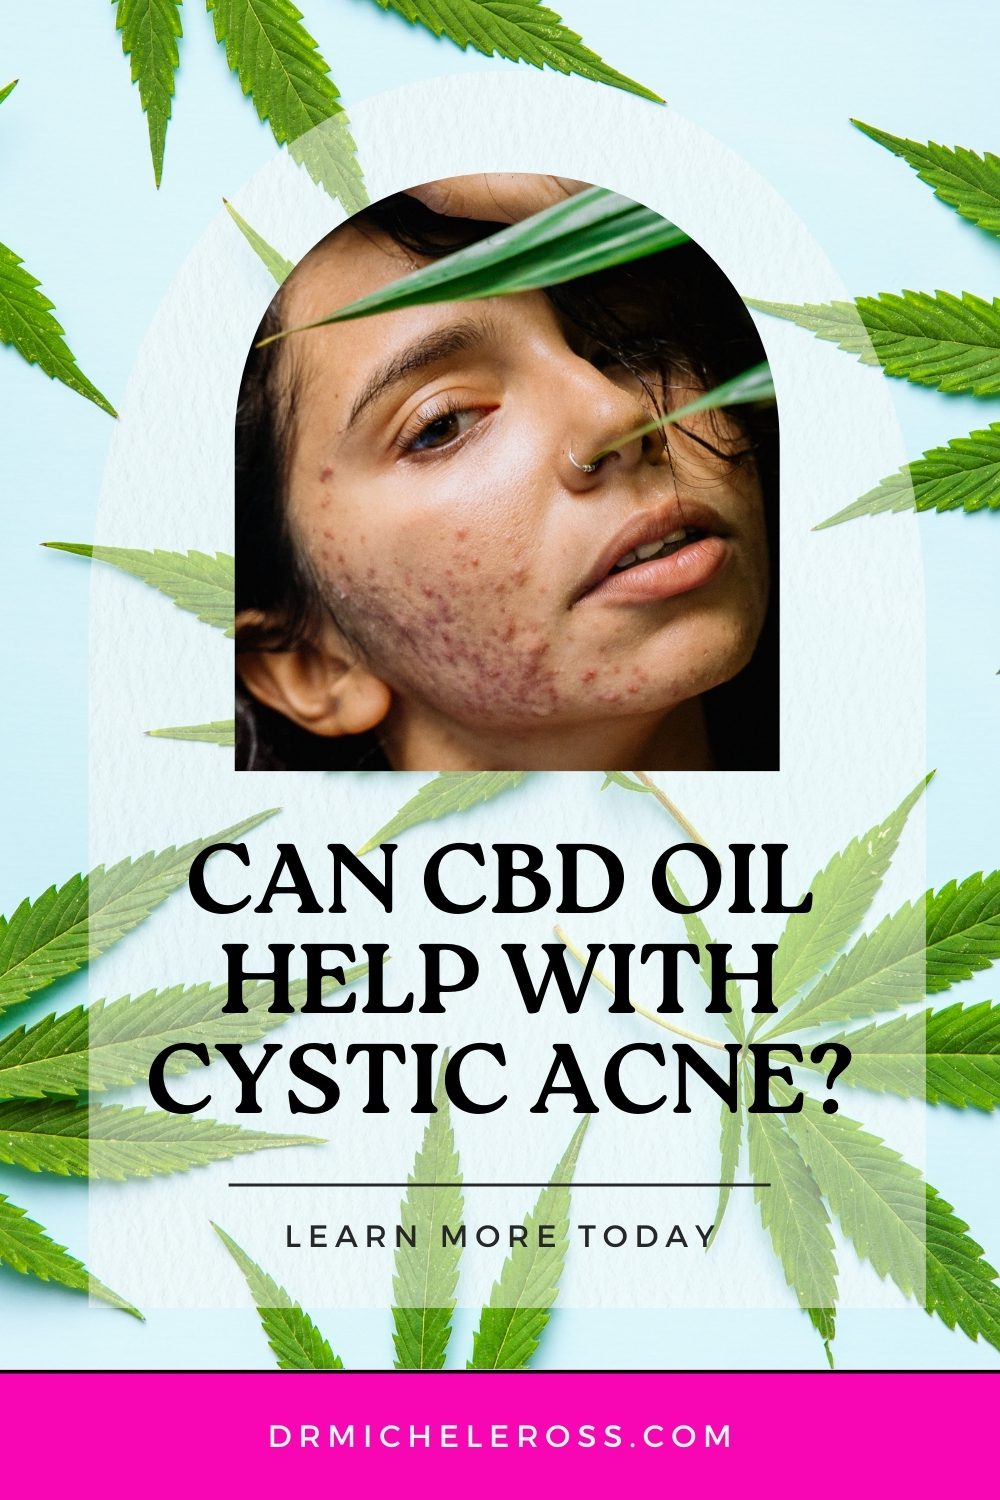 woman with hormonal cystic acne needs cbd cream to heal inflammation